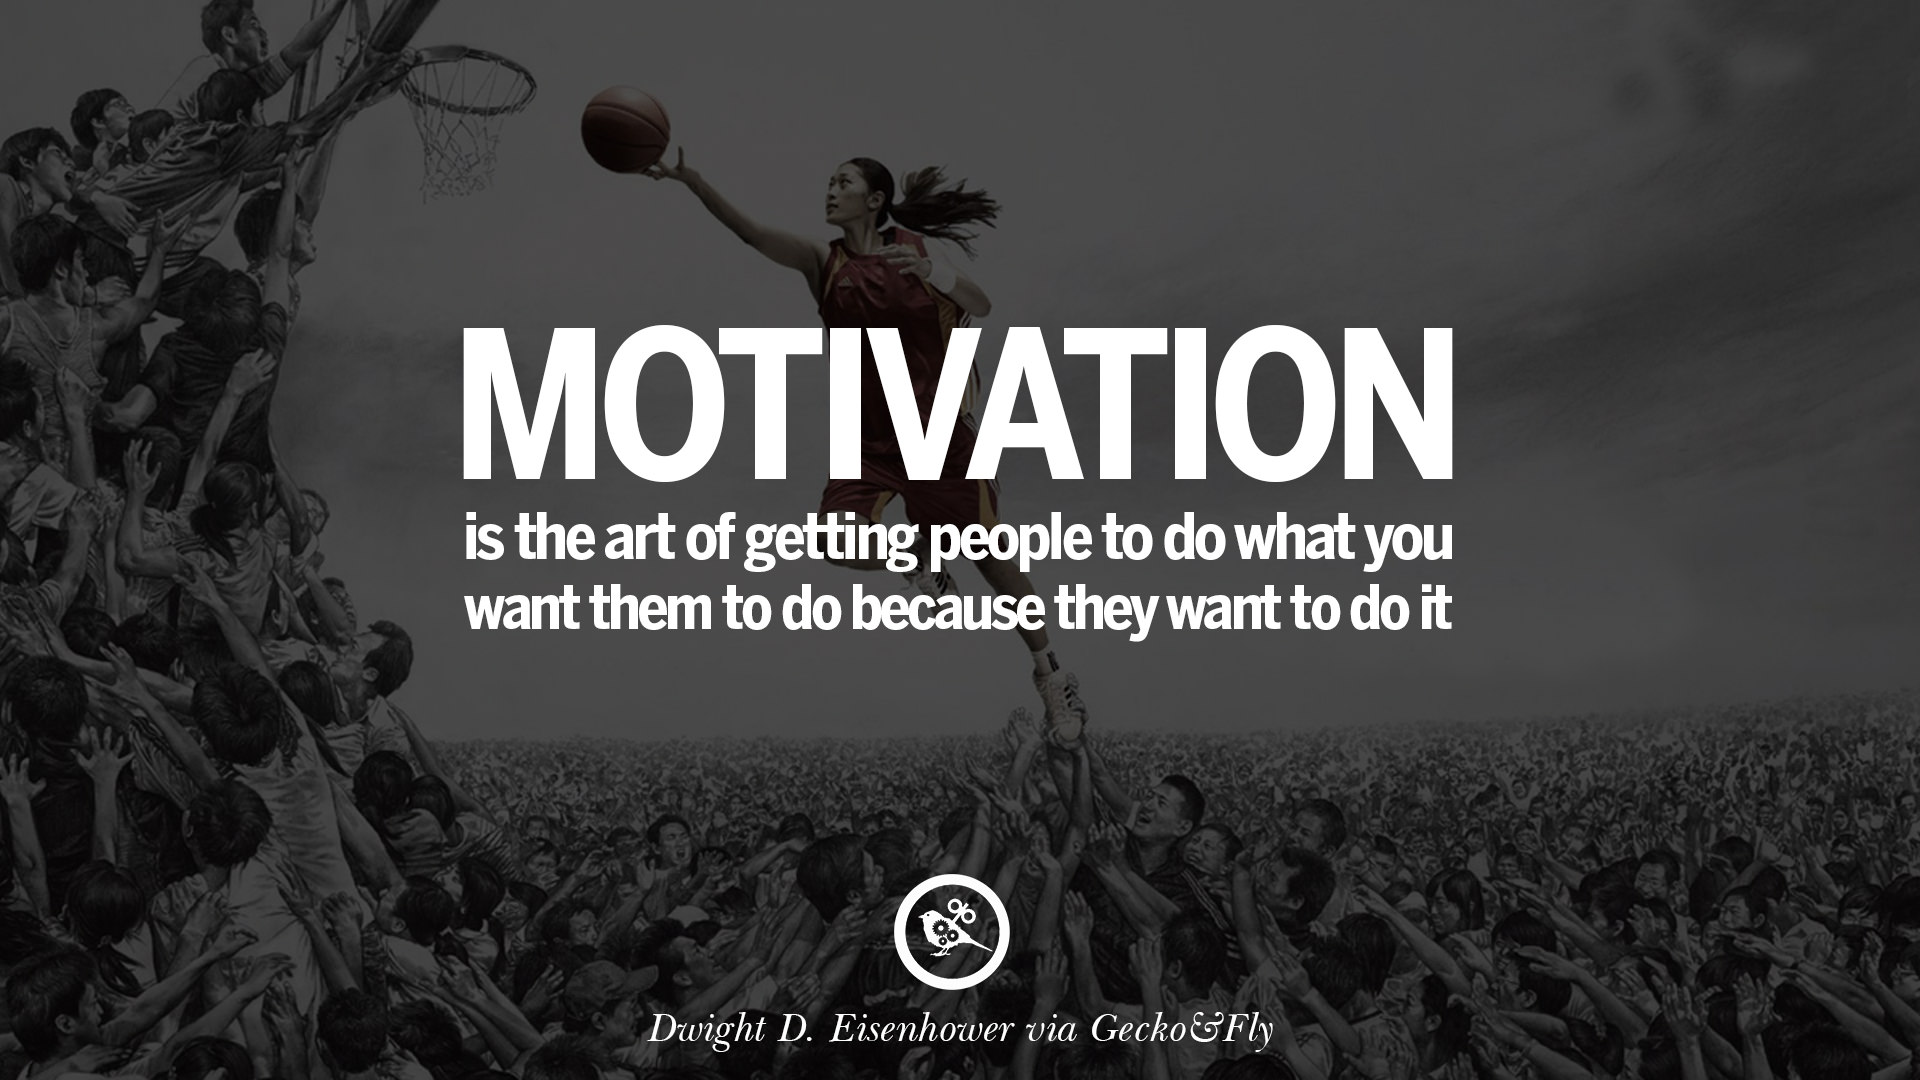 Inspirational Motivational Poster Quotes on Sports and Life Motivation ...